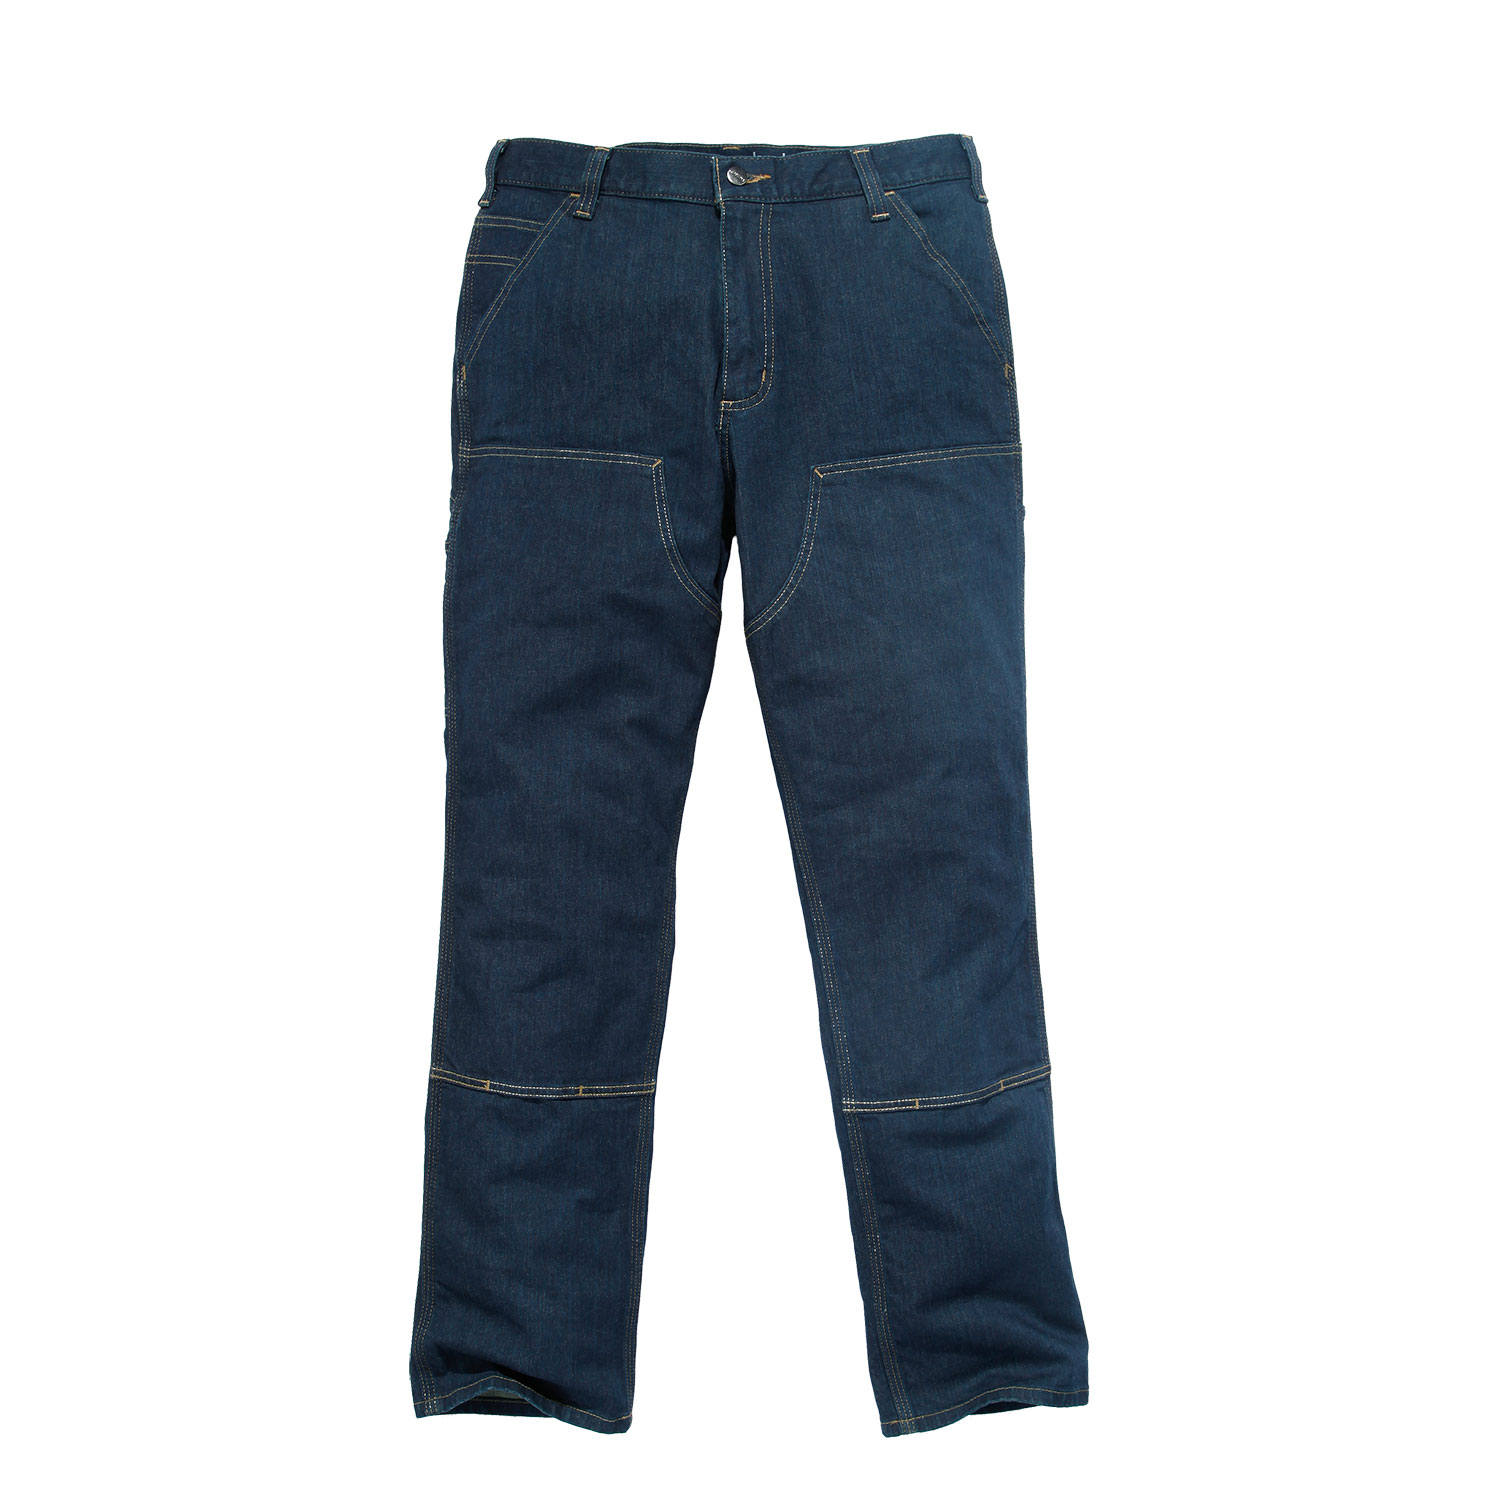 Carhartt Double Front Dungaree Jeans - 1